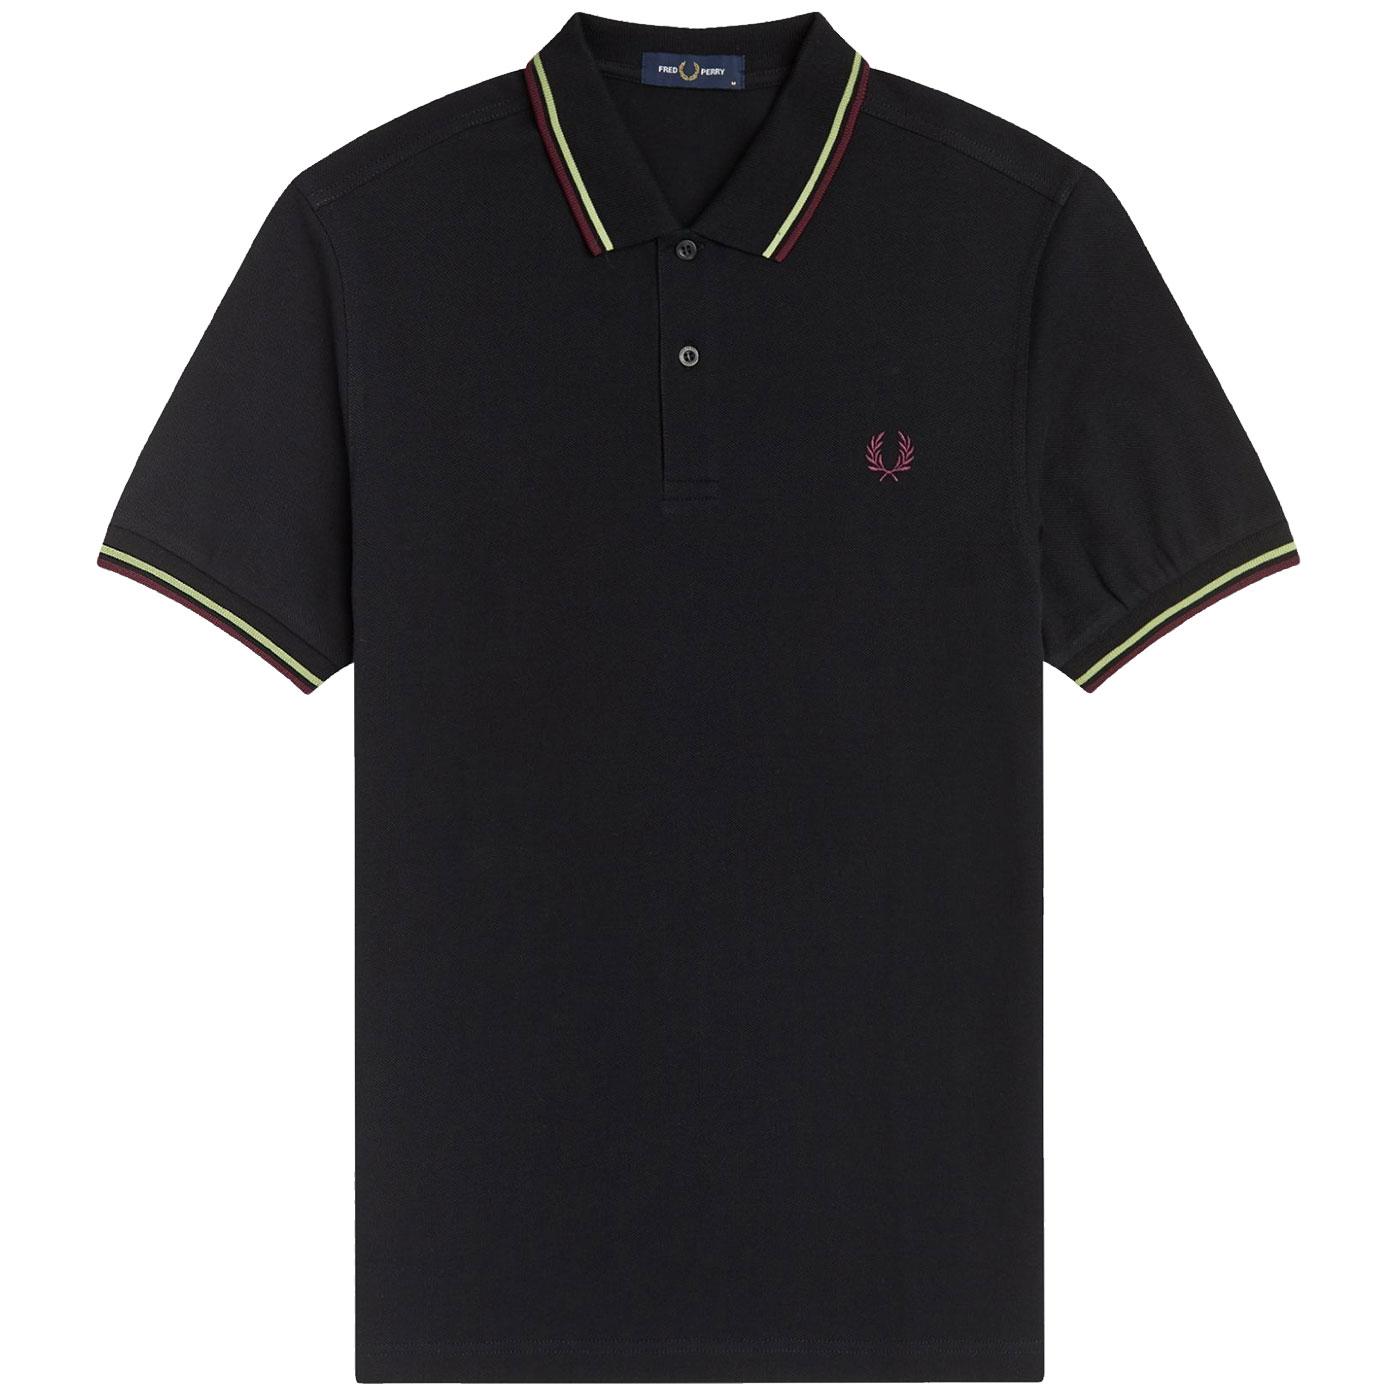 FRED PERRY M3600 Twin Tipped Mod Polo Shirt B/W/M